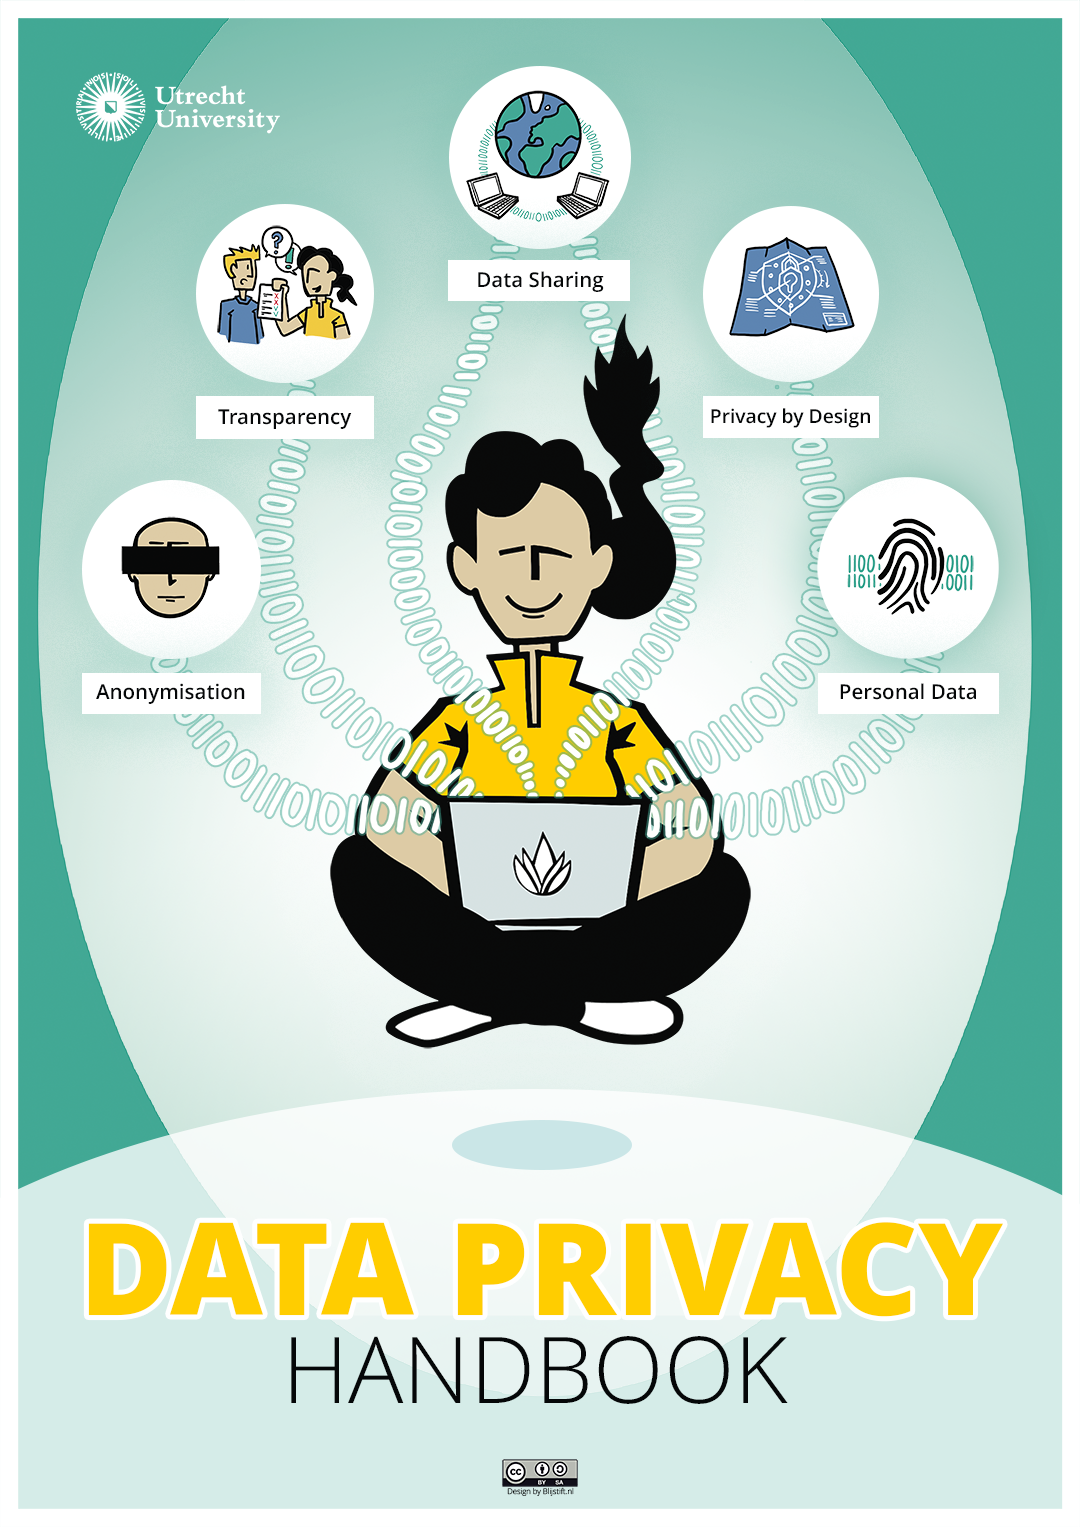 Illustrated cover image for the Data Privacy Handbook, showing a person sitting cross-legged with a laptop on their lap. From the laptop arise several concepts that are covered in the Data Privacy Handbook: Anonymisation (depicted as a face covered with a censor bar), Transparency (depicted as one person showing another person a checklist, informing them), Data sharing (depicted as two laptops connected to a globe), Privacy by Design (depicted as a map with a shield on it), and Personal data (depicted as a fingerprint that connects zeros and ones). The person is floating as if in meditation: happy that they achieved GDPR compliance. The left upper corner of the image shows the Utrecht University logo, and the bottom of the image says ‘Data Privacy Handbook’. Image drawn by Erik van Tuijn for Utrecht University in May of 2023.